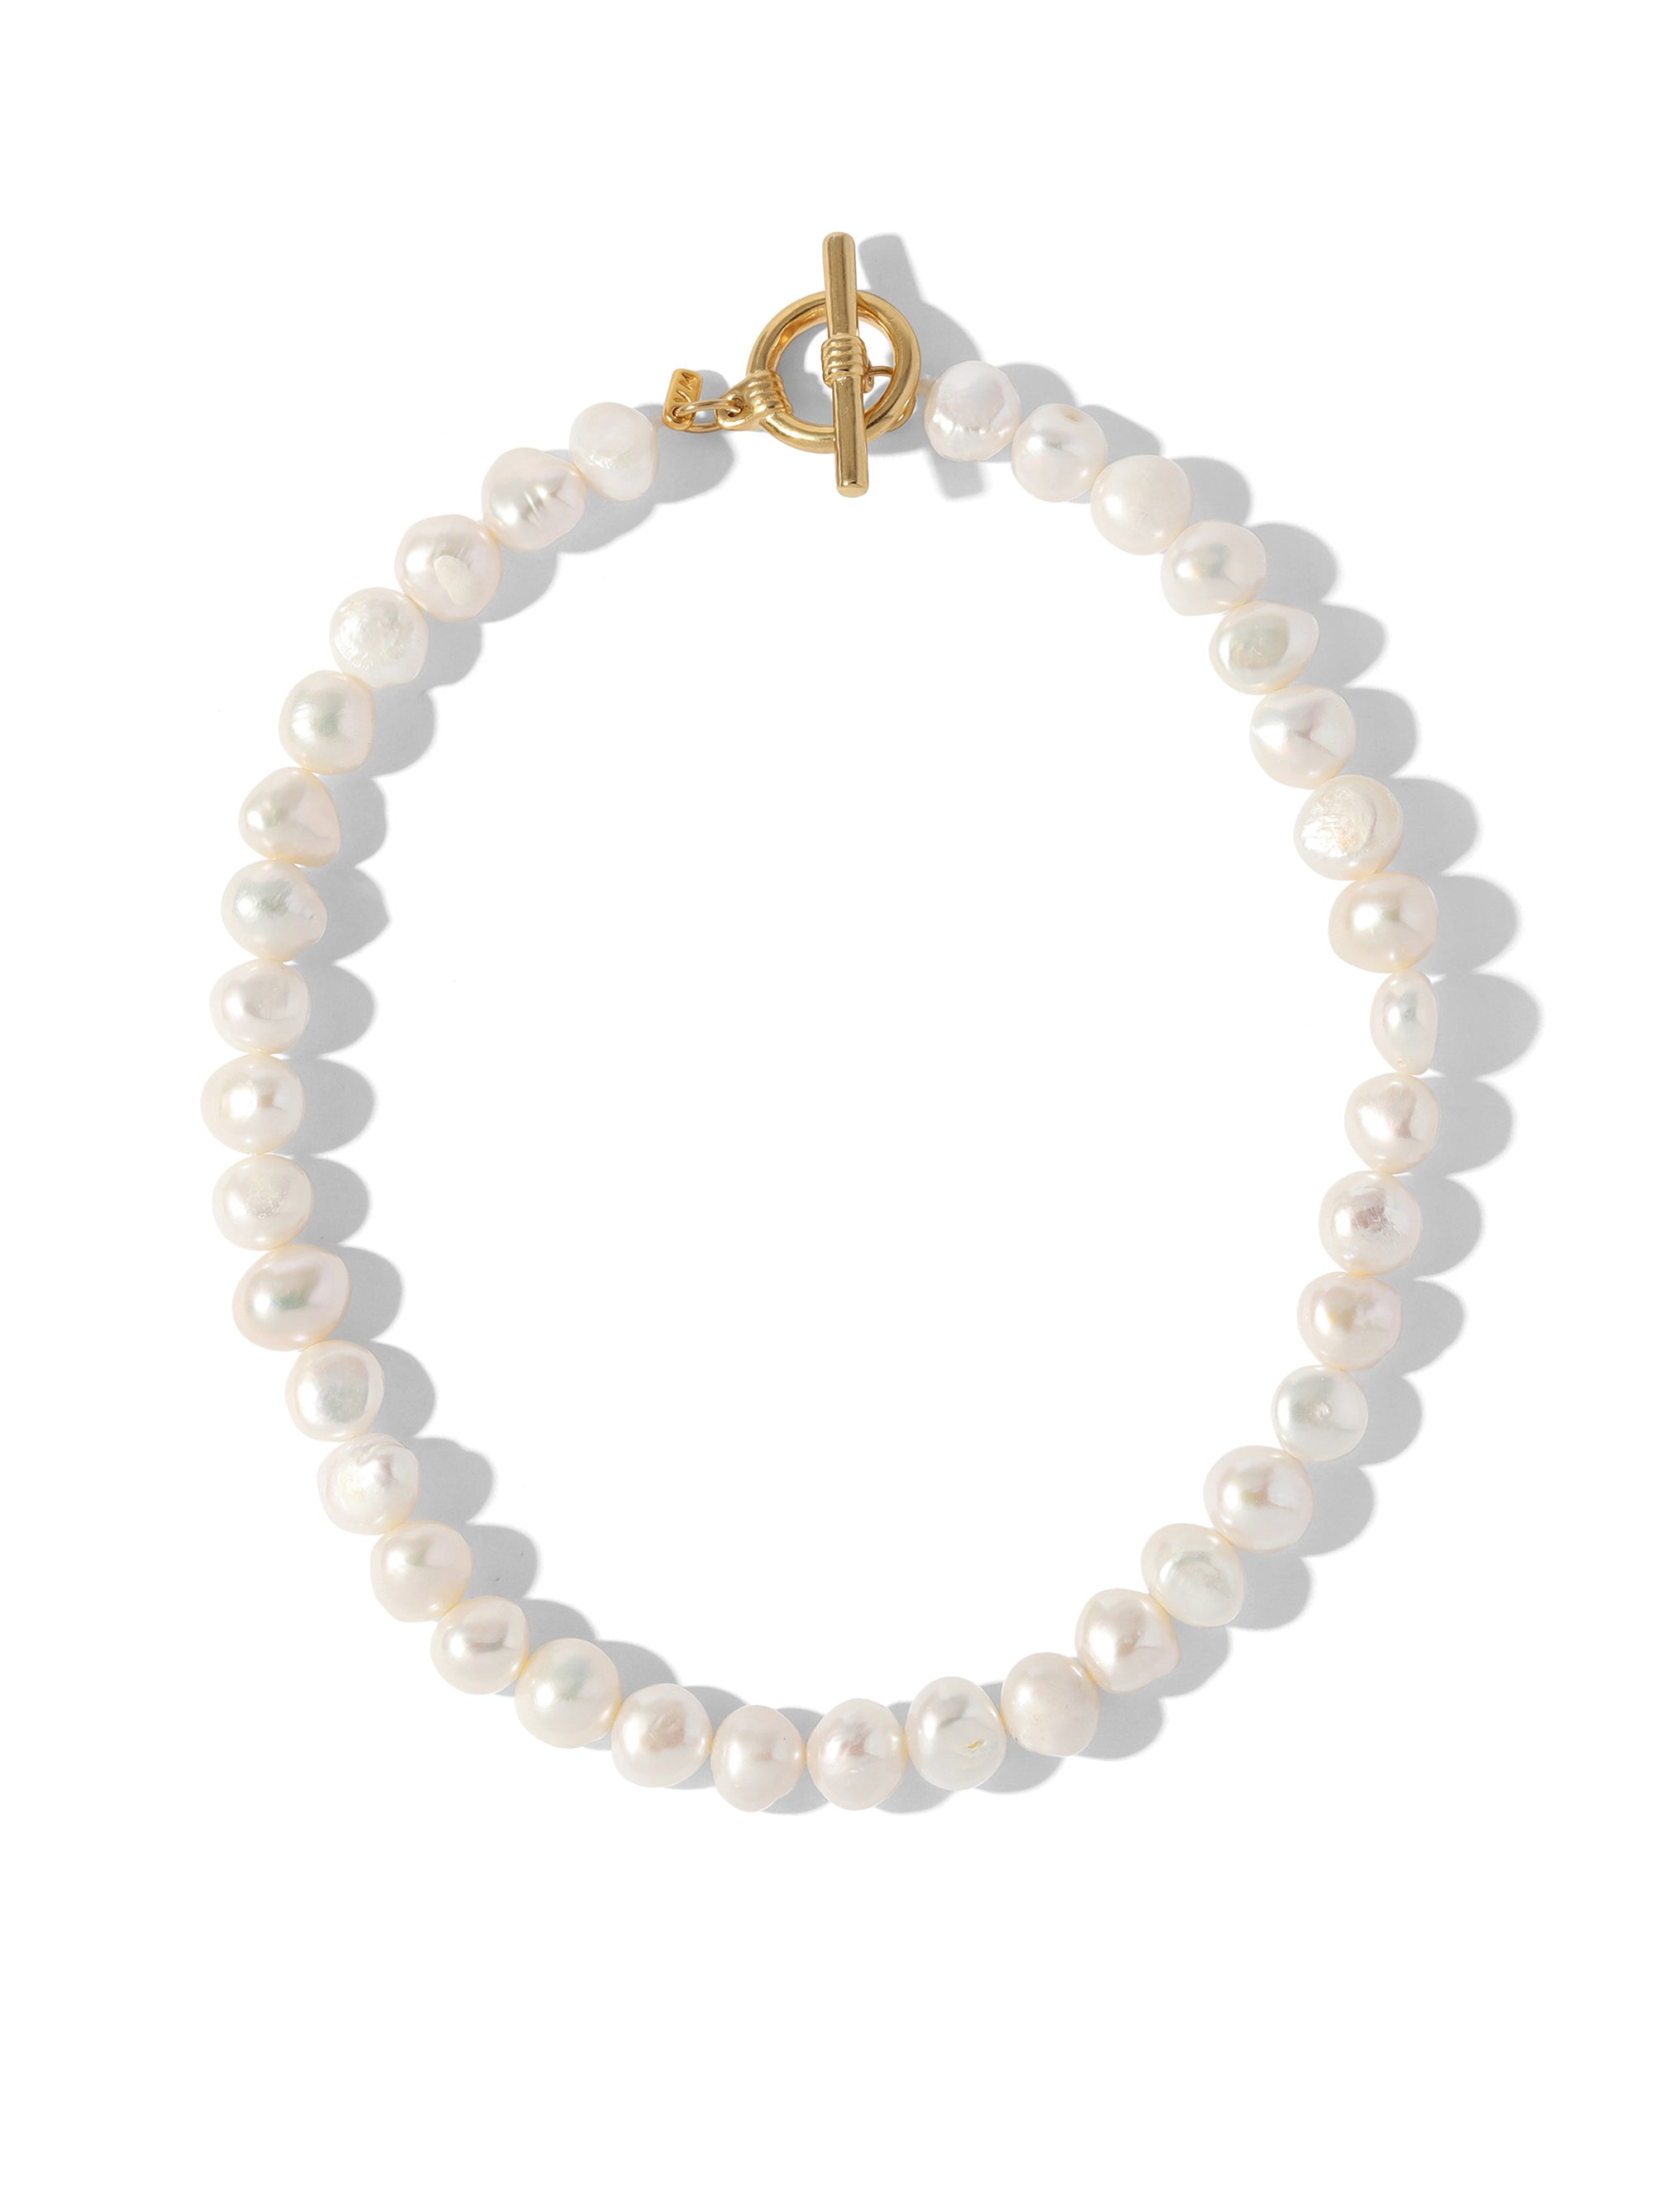 CHANEL Vintage '50s-'60s Large Pearl Choker Necklace